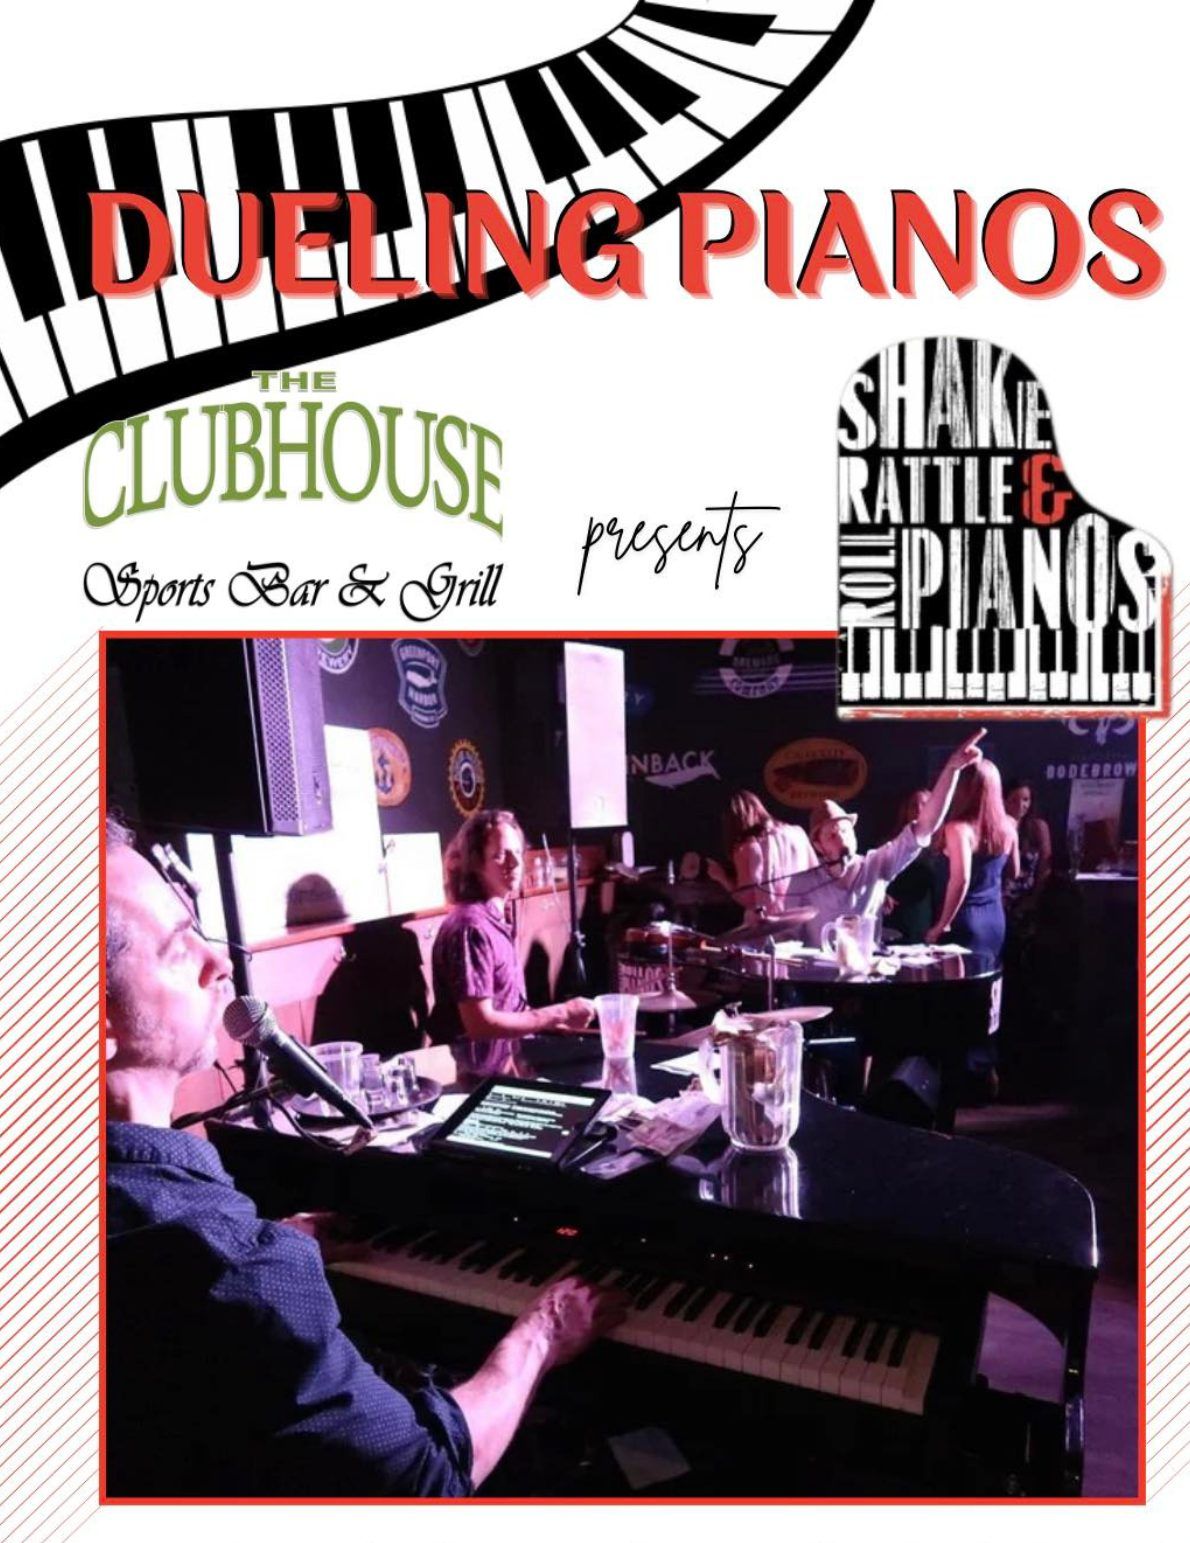 Dueling Pianos: Shake Rattle & Roll at The Clubhouse, Lynchburg, Va